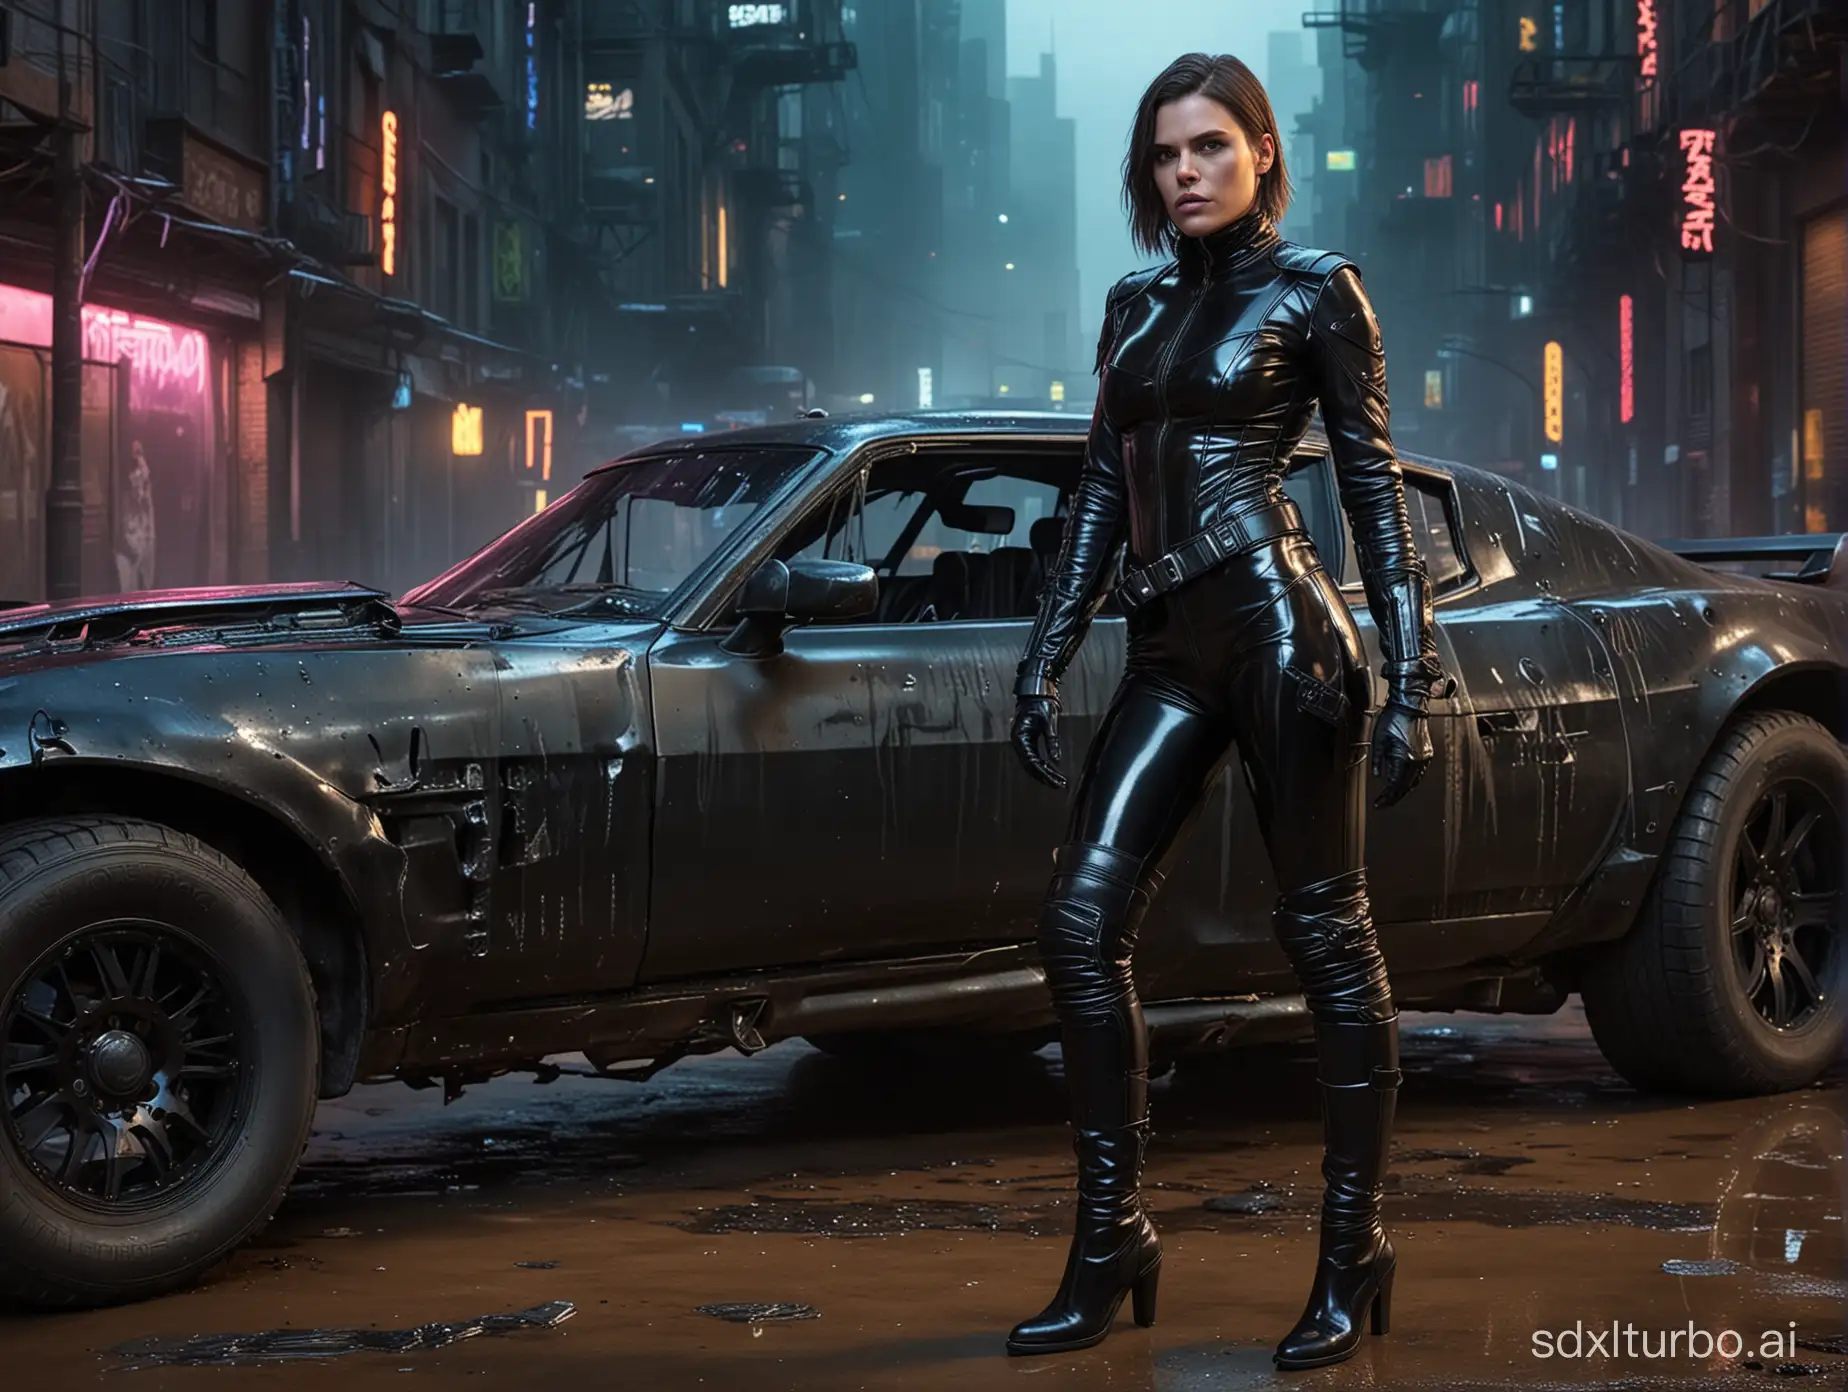 Cyberpunk-Police-Officer-Clea-Duvall-Stands-in-Shiny-PVC-Attire-Amidst-Urban-Decay